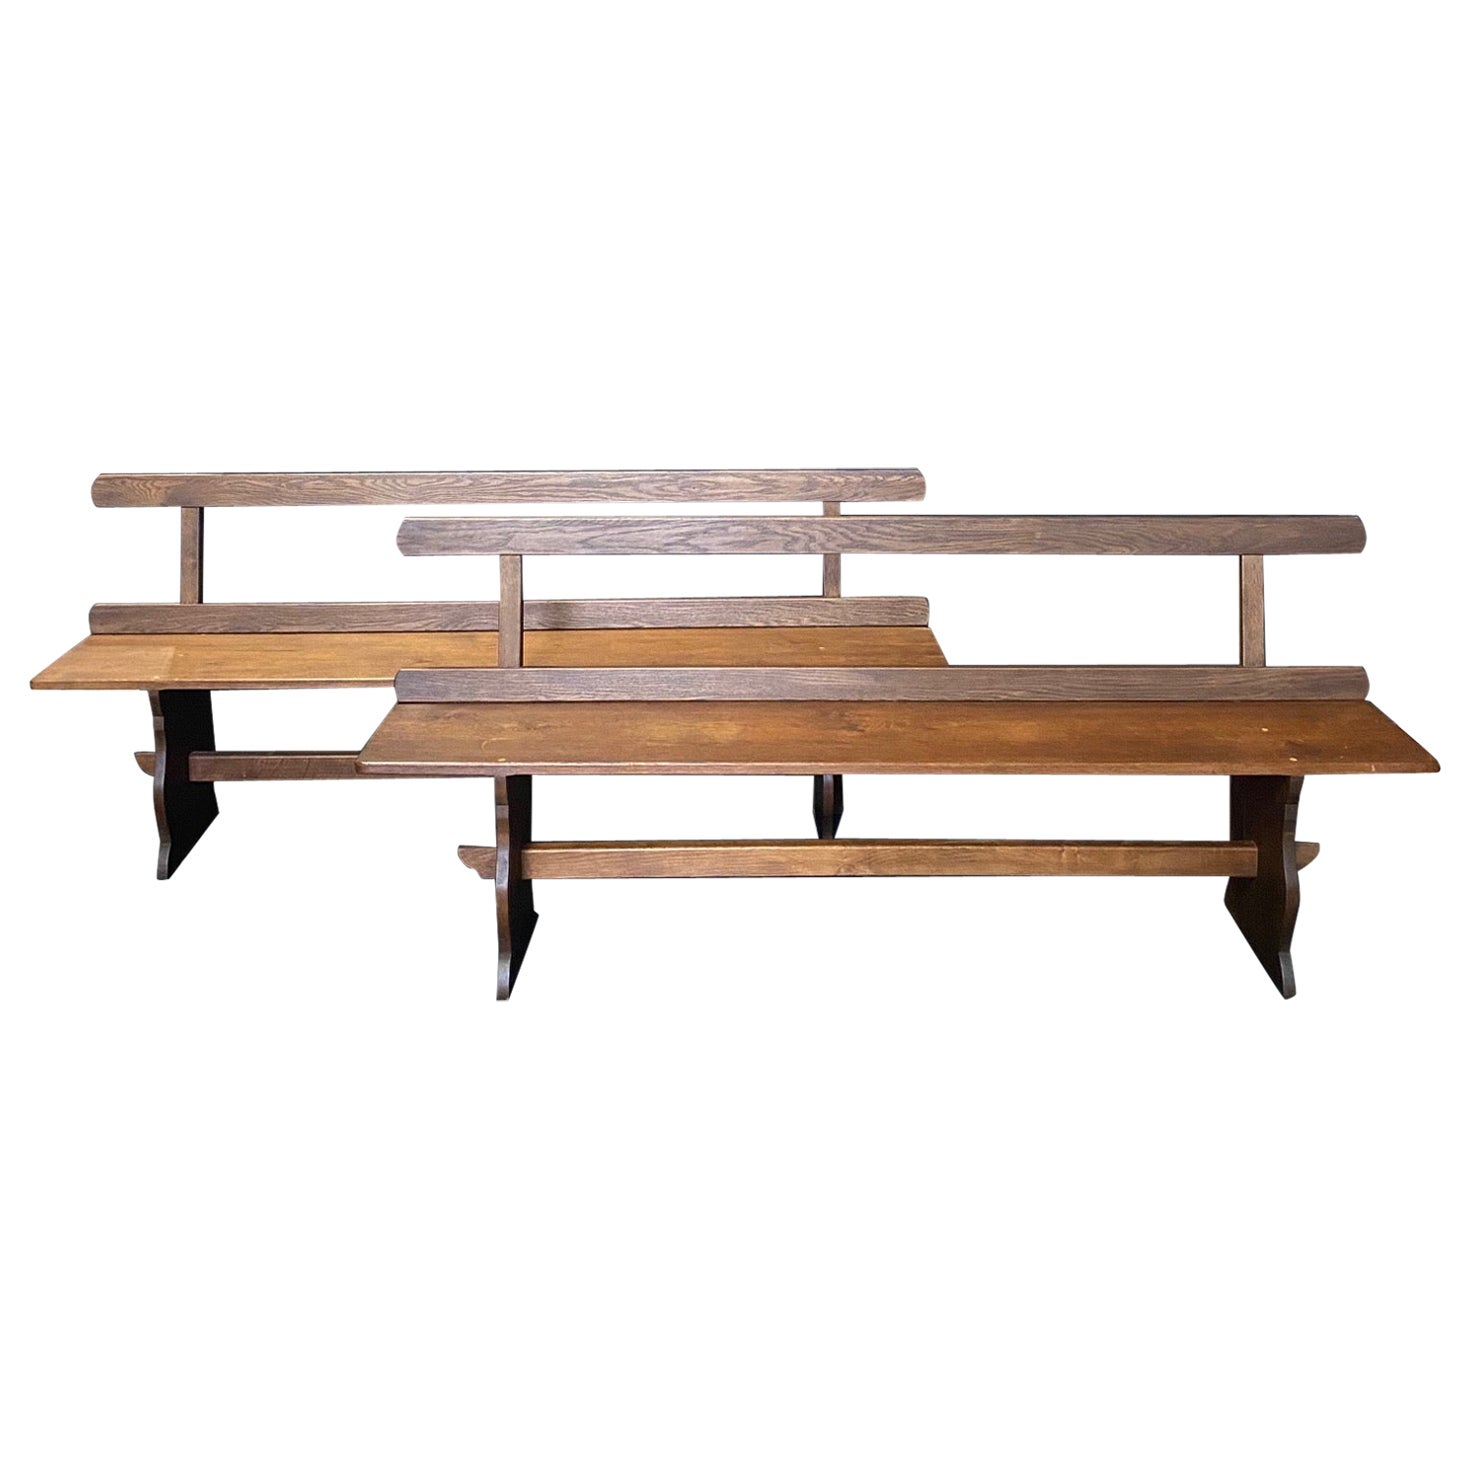 Pair of Antique French Solid Walnut Benches or Dining Seats with Backs  For Sale